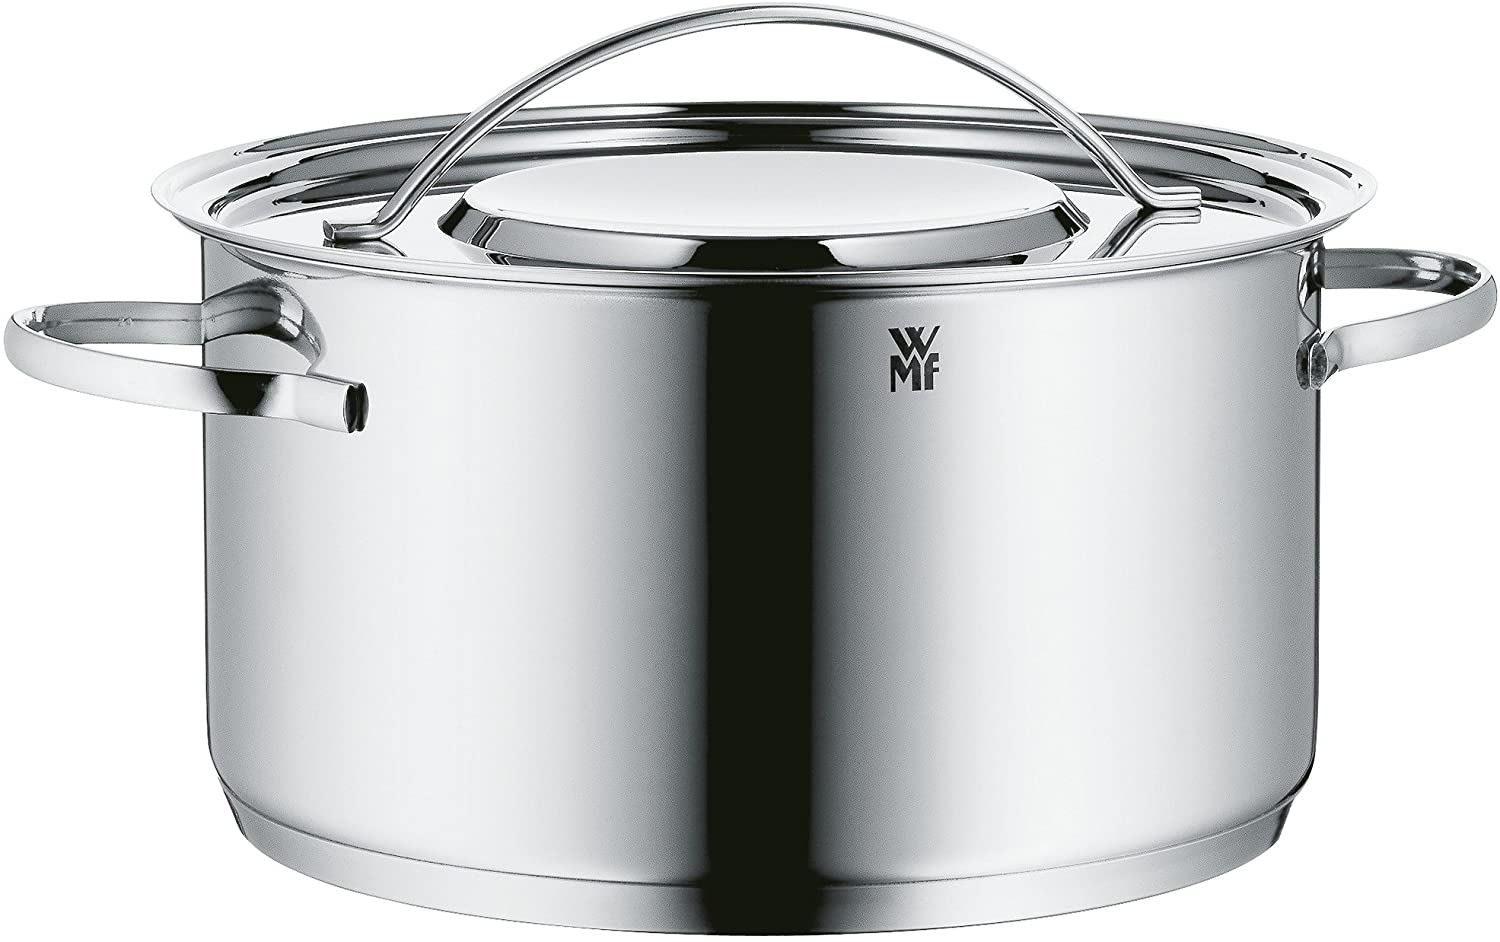 WMF Gala Plus High Casserole with Lid, 18/10 Stainless Steel, 24cm